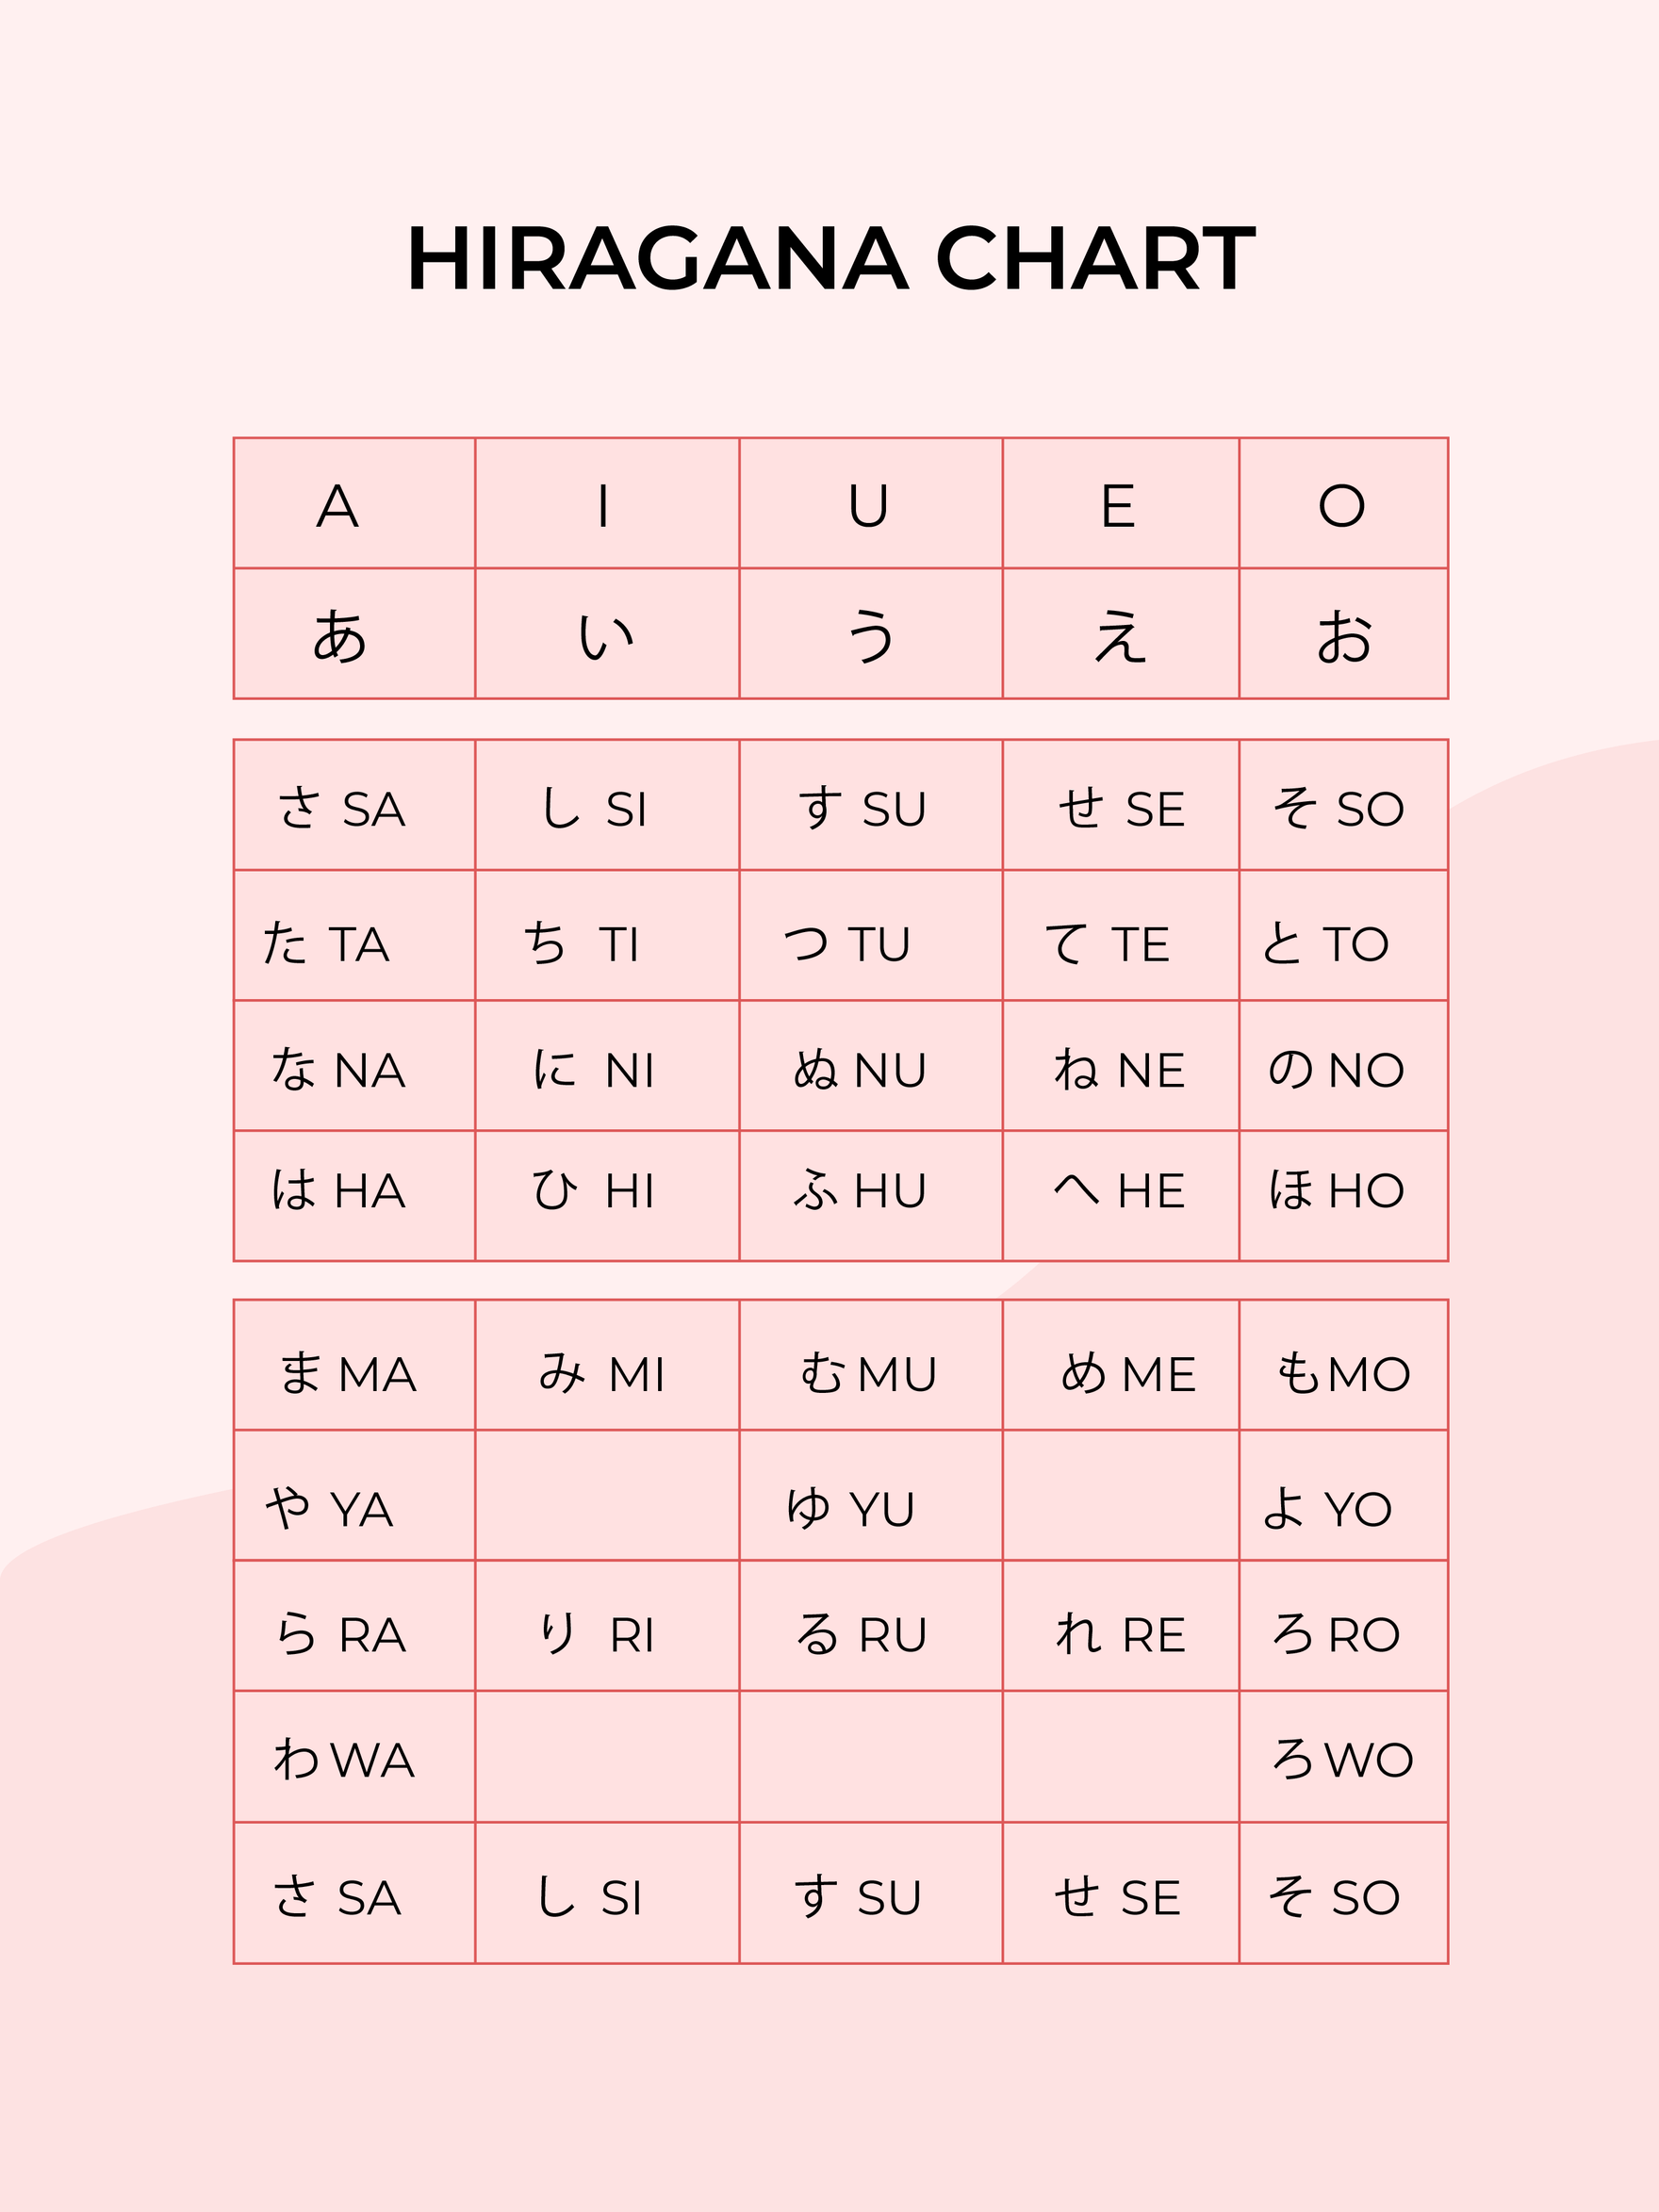 Hiragana Chart Template in PDF - FREE Download | Template.net